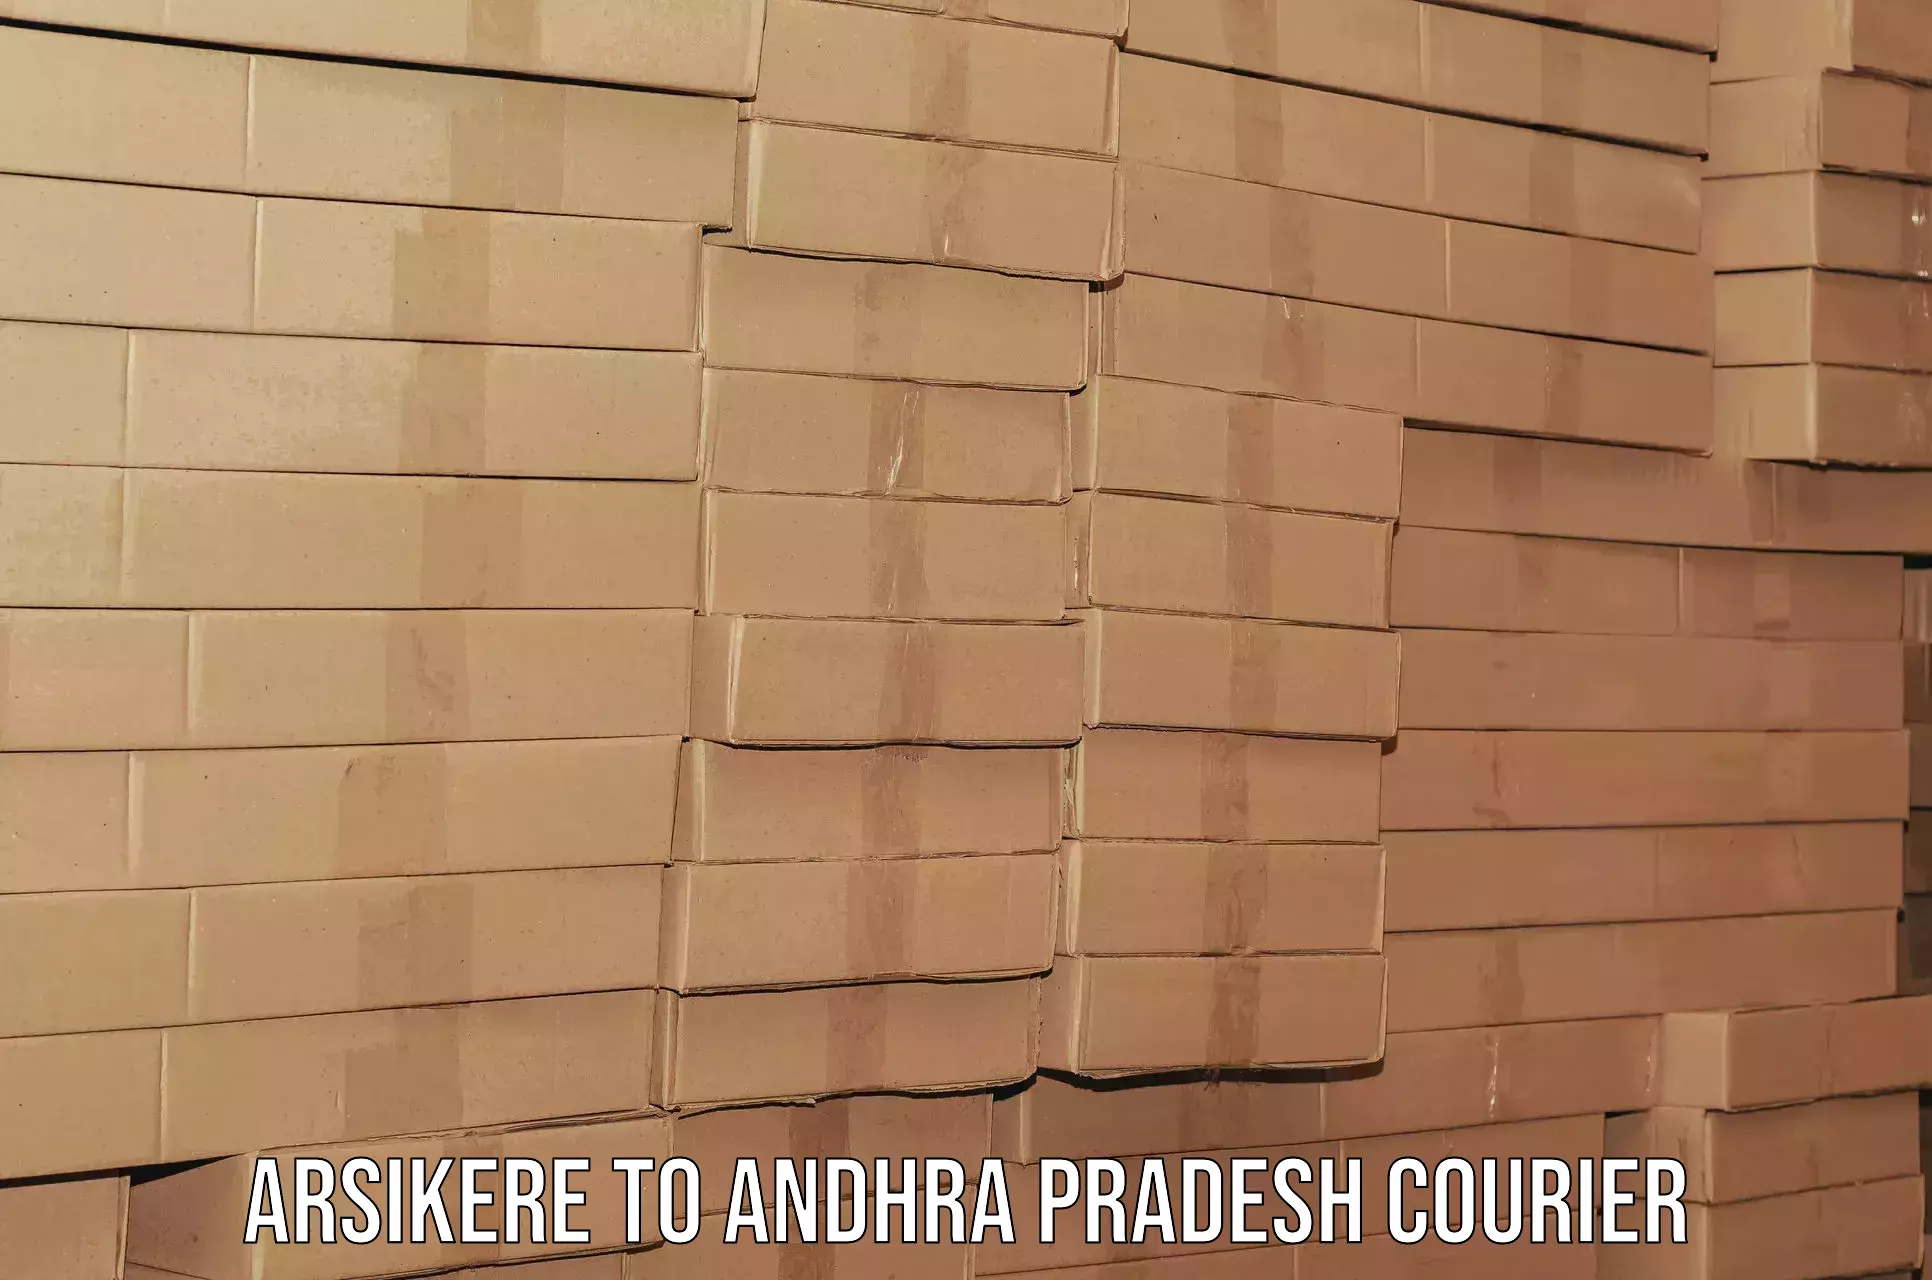 Home goods moving company Arsikere to Andhra Pradesh